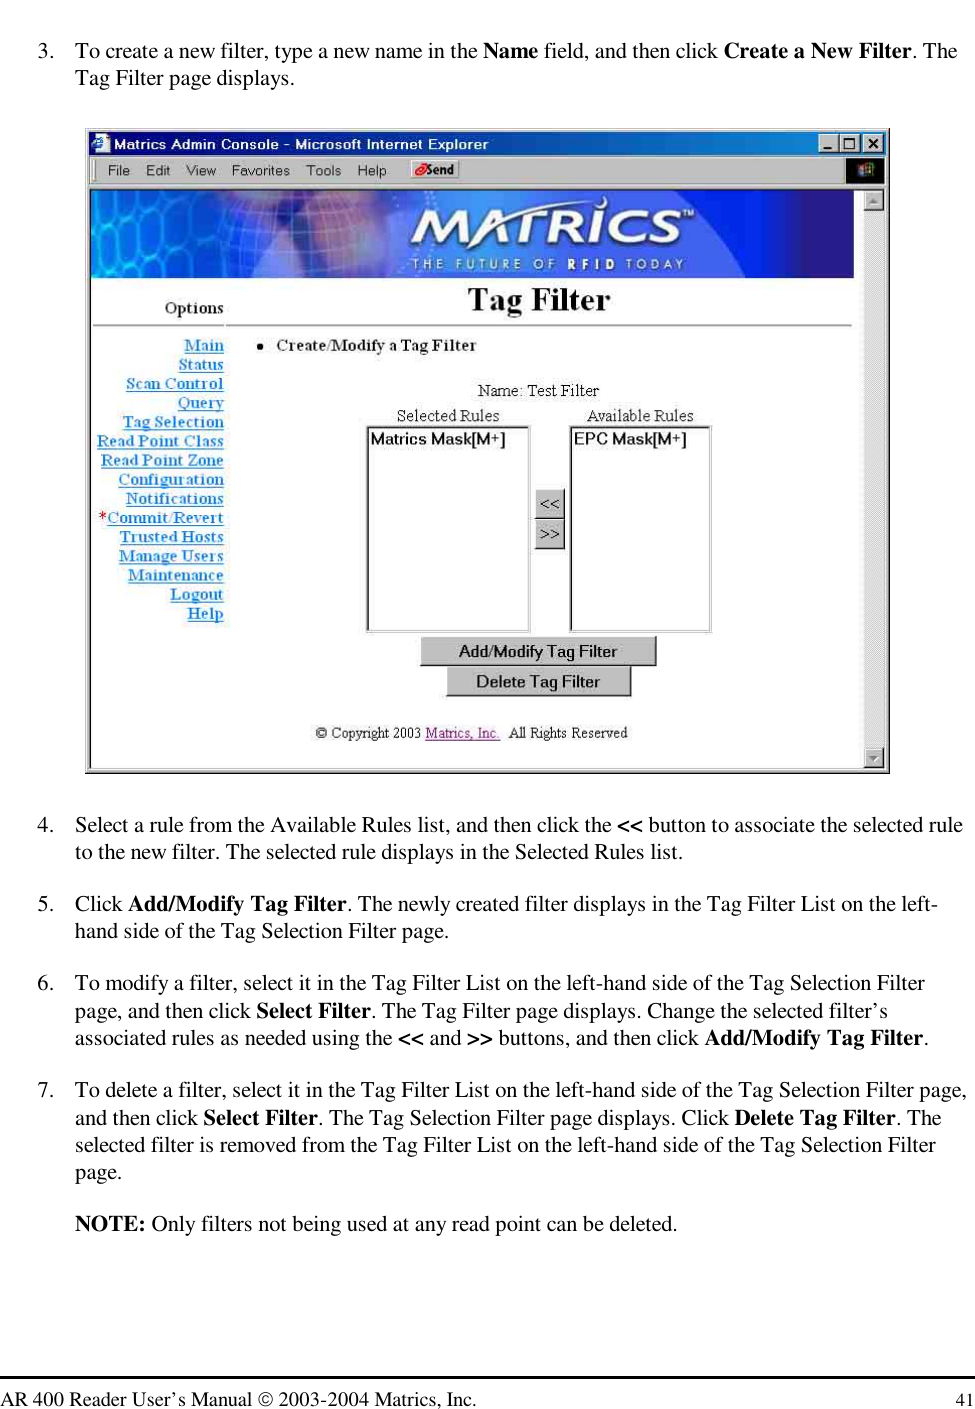   AR 400 Reader User’s Manual  2003-2004 Matrics, Inc.  41 3.  To create a new filter, type a new name in the Name field, and then click Create a New Filter. The Tag Filter page displays.  4.  Select a rule from the Available Rules list, and then click the &lt;&lt; button to associate the selected rule to the new filter. The selected rule displays in the Selected Rules list. 5. Click Add/Modify Tag Filter. The newly created filter displays in the Tag Filter List on the left-hand side of the Tag Selection Filter page. 6.  To modify a filter, select it in the Tag Filter List on the left-hand side of the Tag Selection Filter page, and then click Select Filter. The Tag Filter page displays. Change the selected filter’s associated rules as needed using the &lt;&lt; and &gt;&gt; buttons, and then click Add/Modify Tag Filter.  7.  To delete a filter, select it in the Tag Filter List on the left-hand side of the Tag Selection Filter page, and then click Select Filter. The Tag Selection Filter page displays. Click Delete Tag Filter. The selected filter is removed from the Tag Filter List on the left-hand side of the Tag Selection Filter page. NOTE: Only filters not being used at any read point can be deleted. 